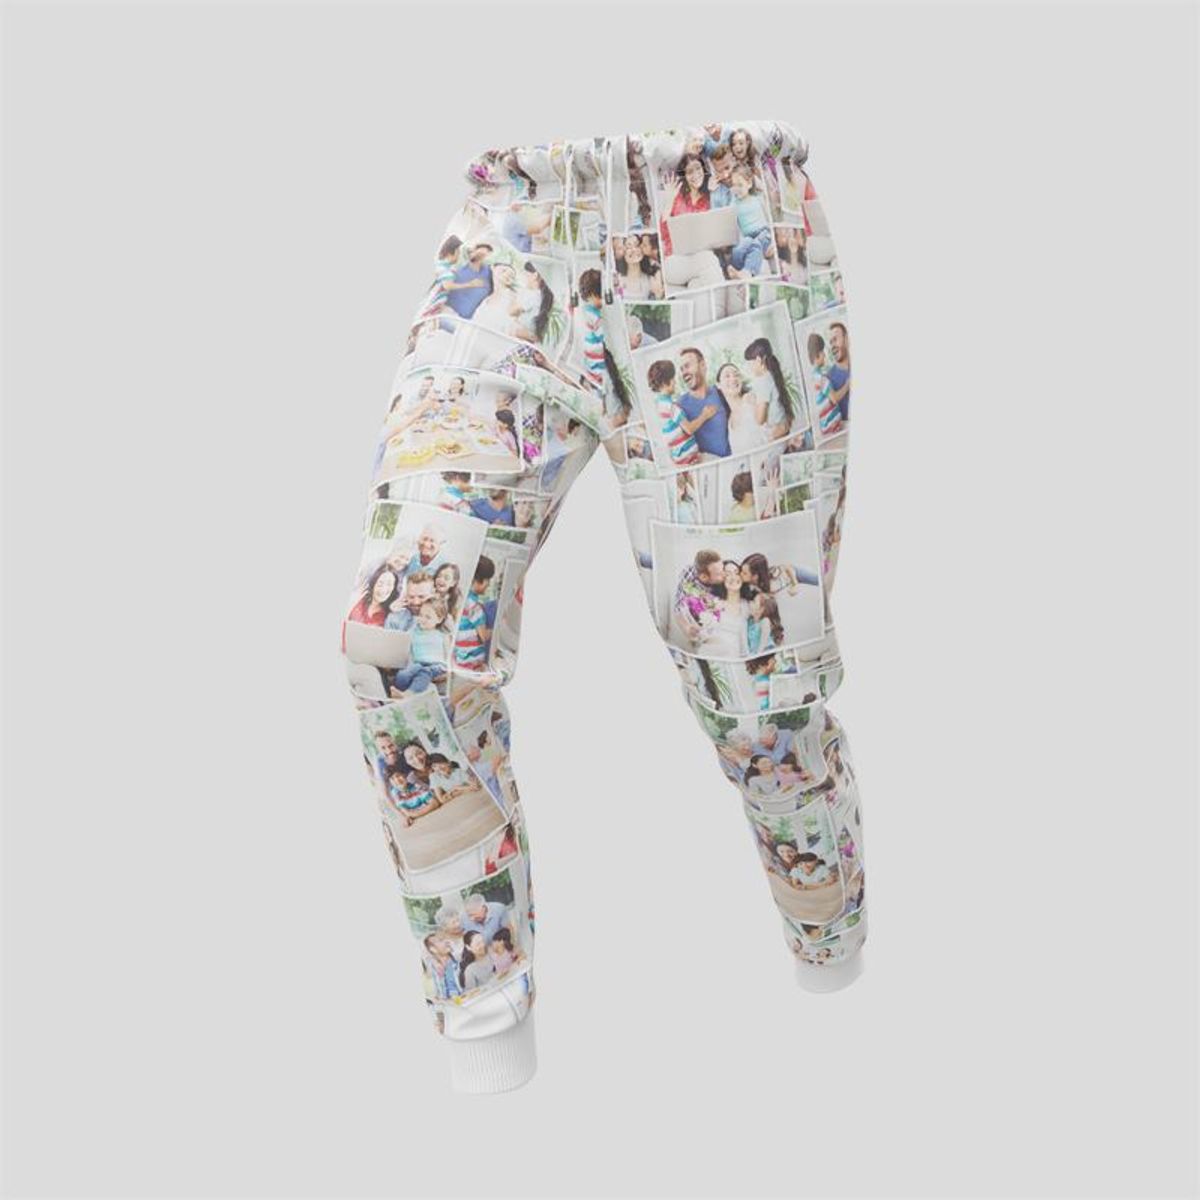 Custom Core Fleece Jogger, Personalized Sweatpants, Custom Team Pants,  Customize Sweatpants, Unique Design. Gift for Him and Her, PC78J 